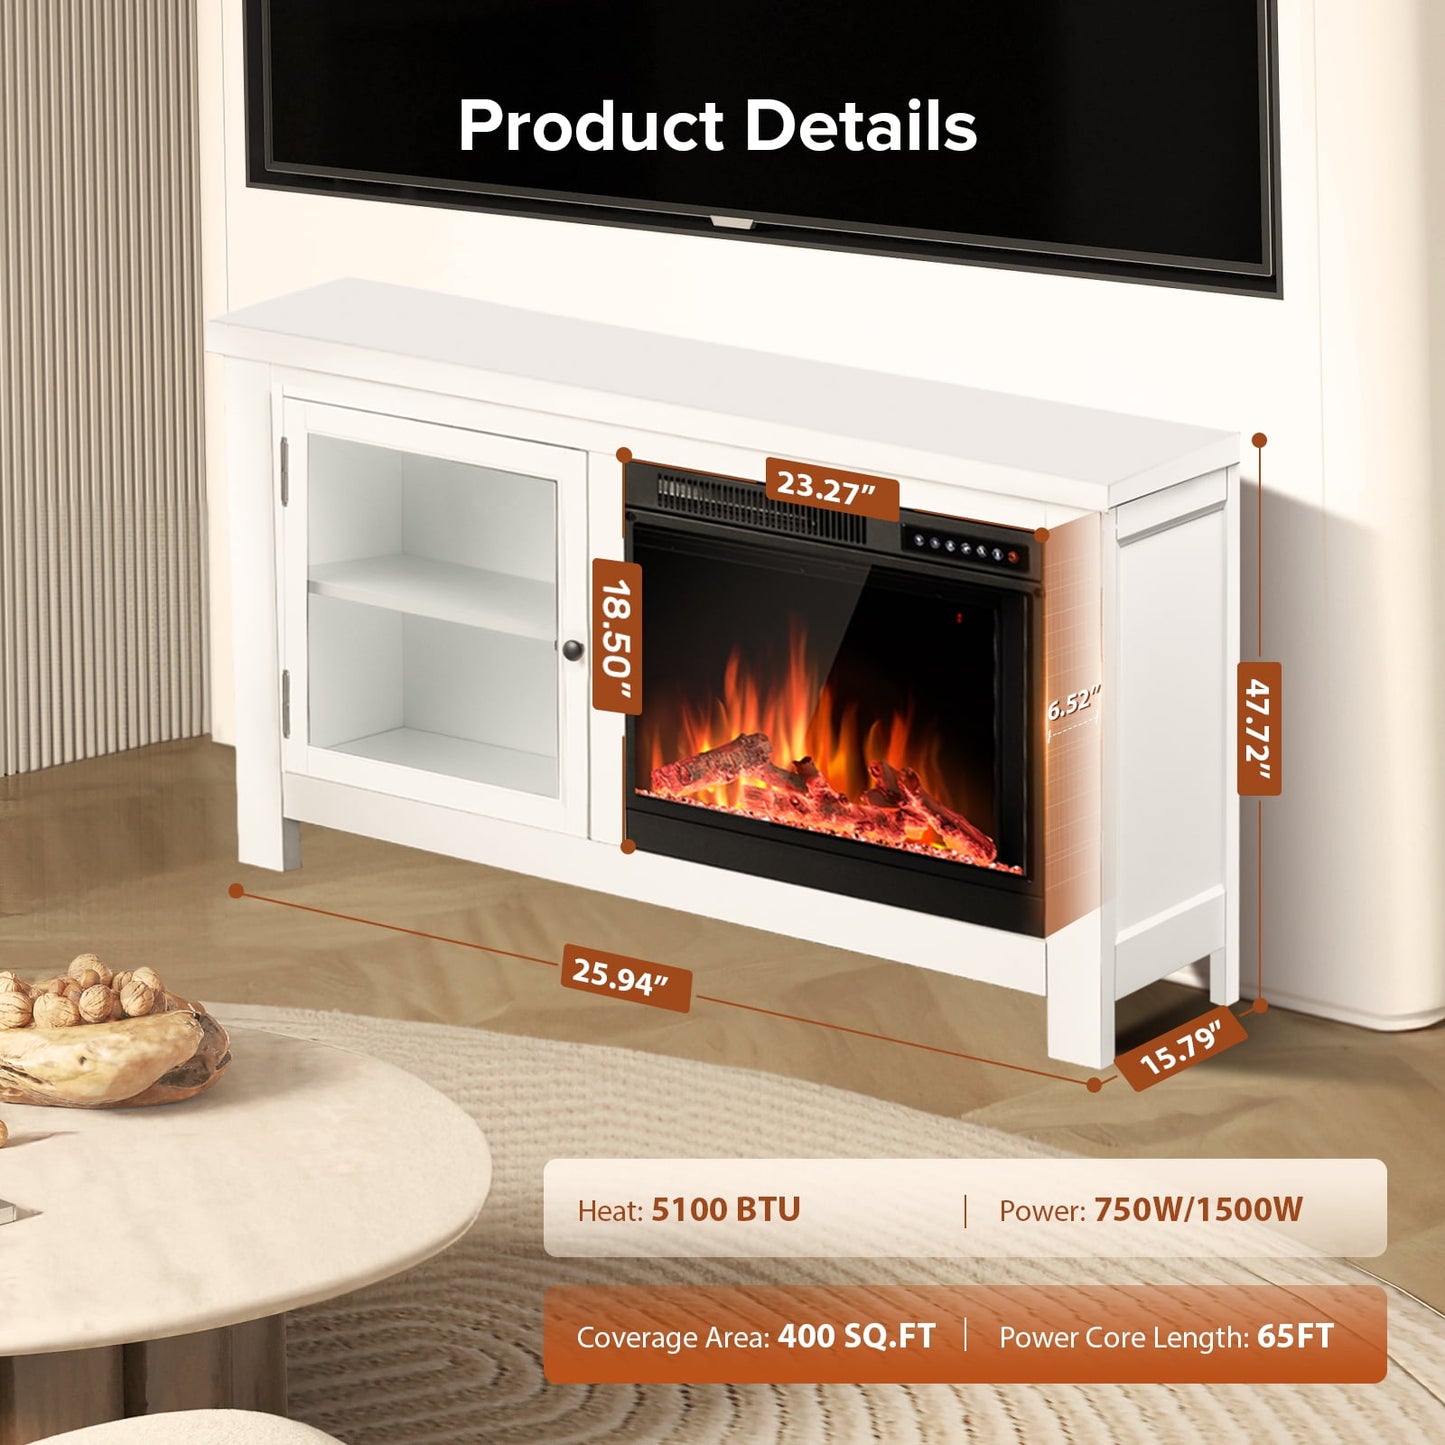 KISSAIR 48'' Freestanding Electric Fireplace Wood Mantel with Log, Fireplace TVs Up to 50", Adjustable 3D Flame & Flame Brightness & Flame Bed Color, Remote Control, 750W/1500W（White）